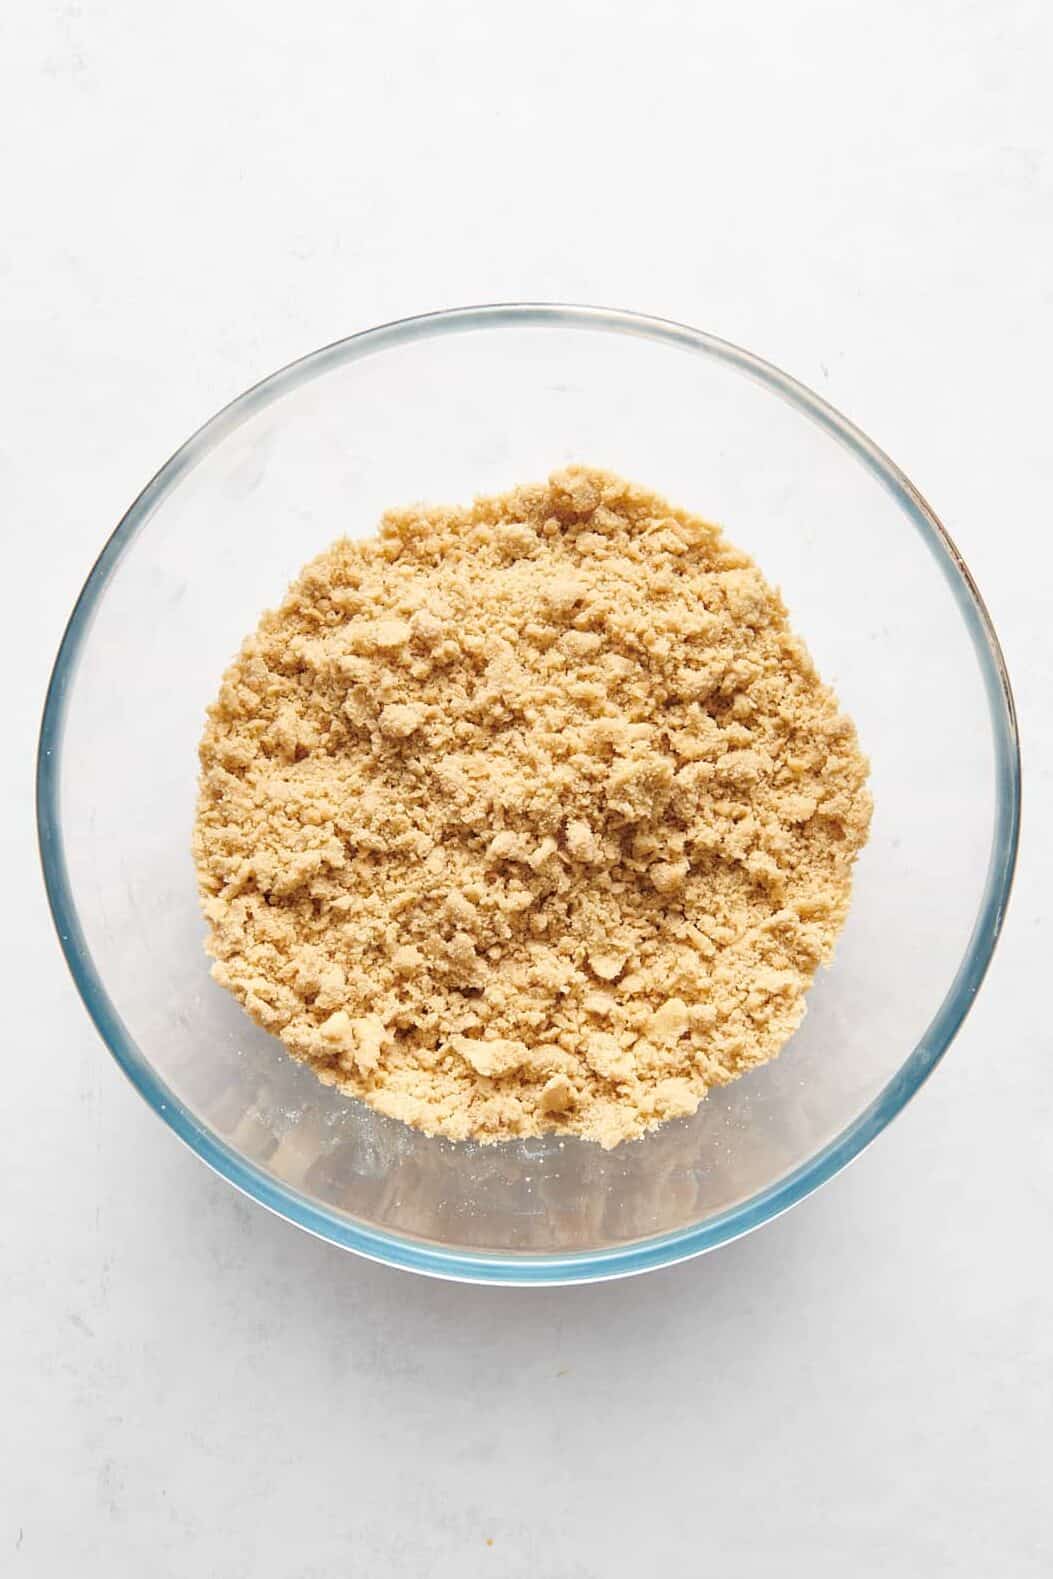 large glass bowl of peach crumble topping mixture